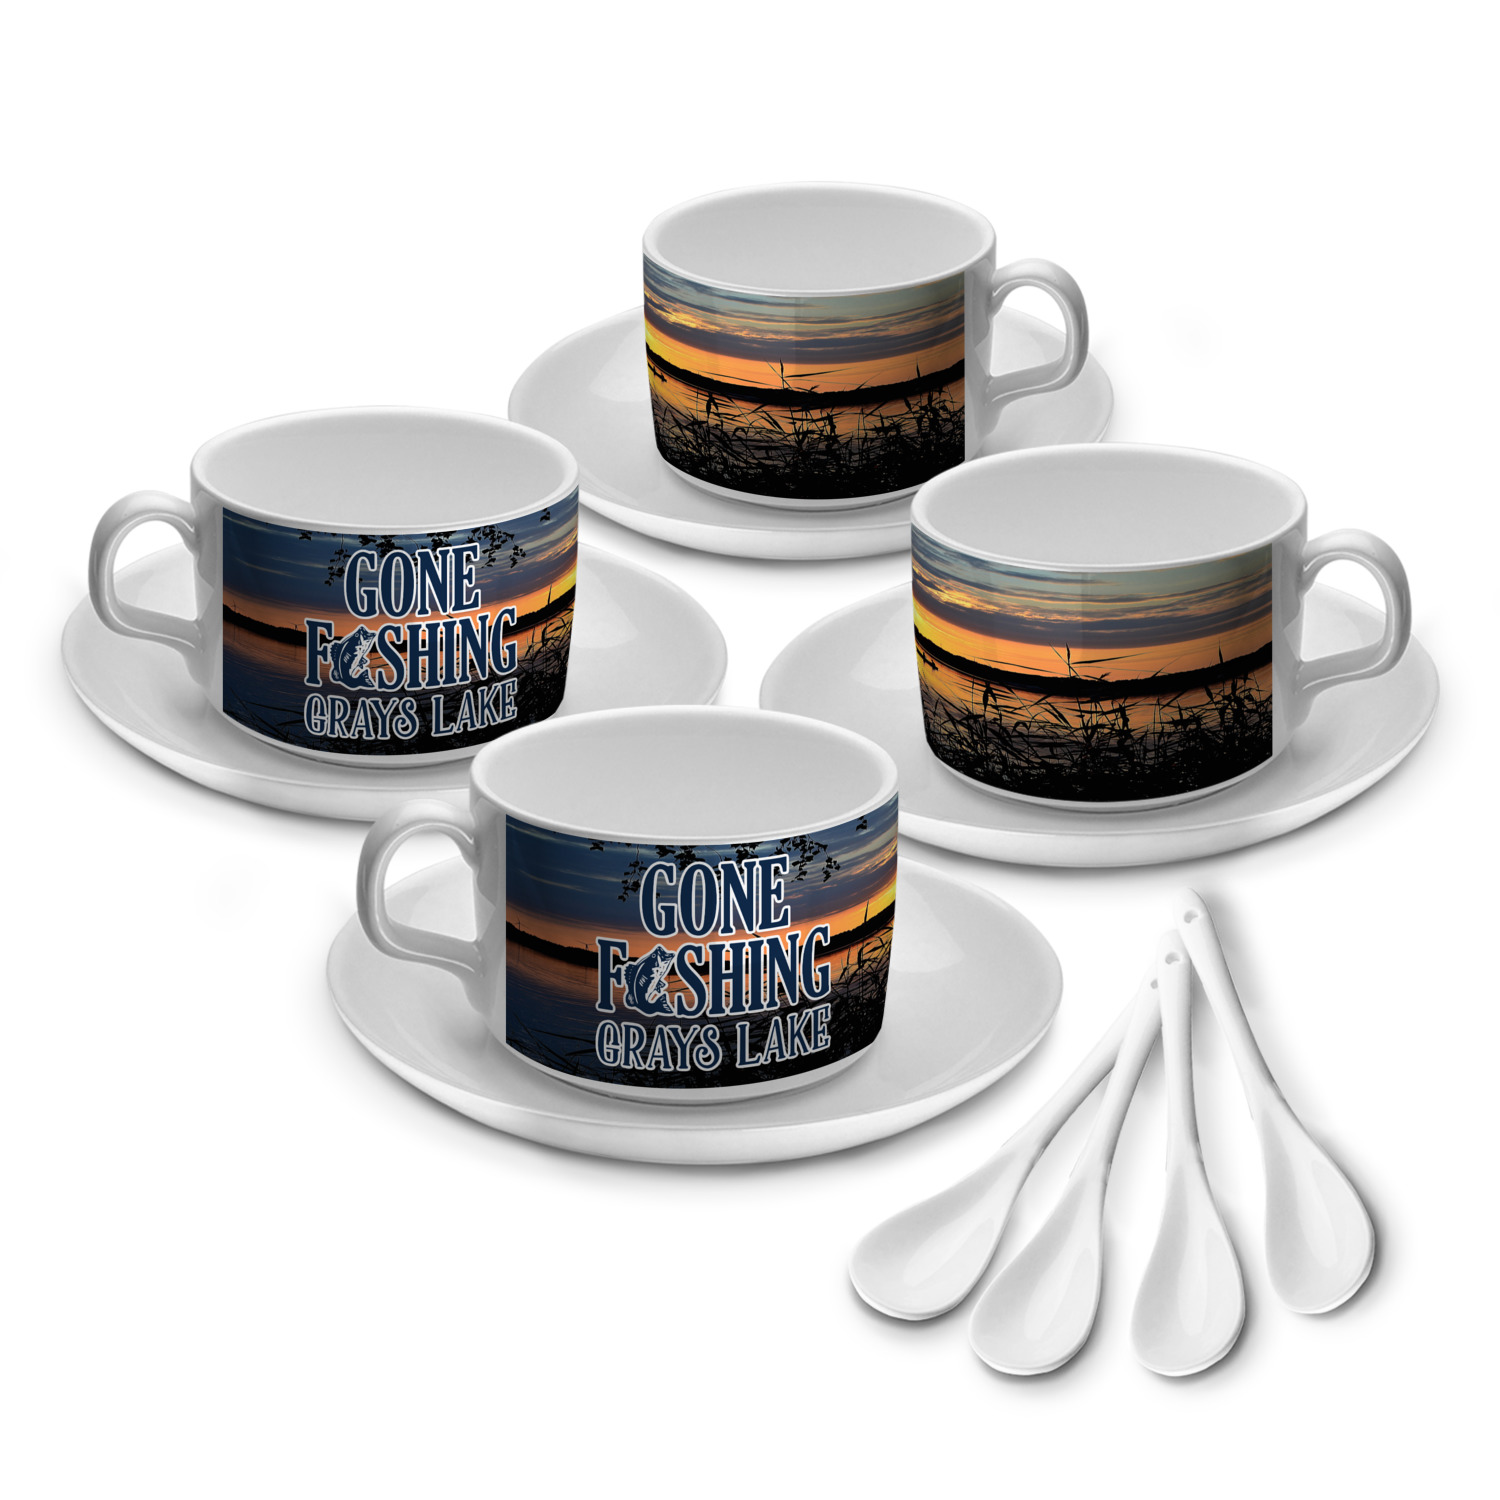 https://www.youcustomizeit.com/common/MAKE/1038229/Hunting-Fishing-Quotes-and-Sayings-Tea-Cup-Set-of-4.jpg?lm=1684770751